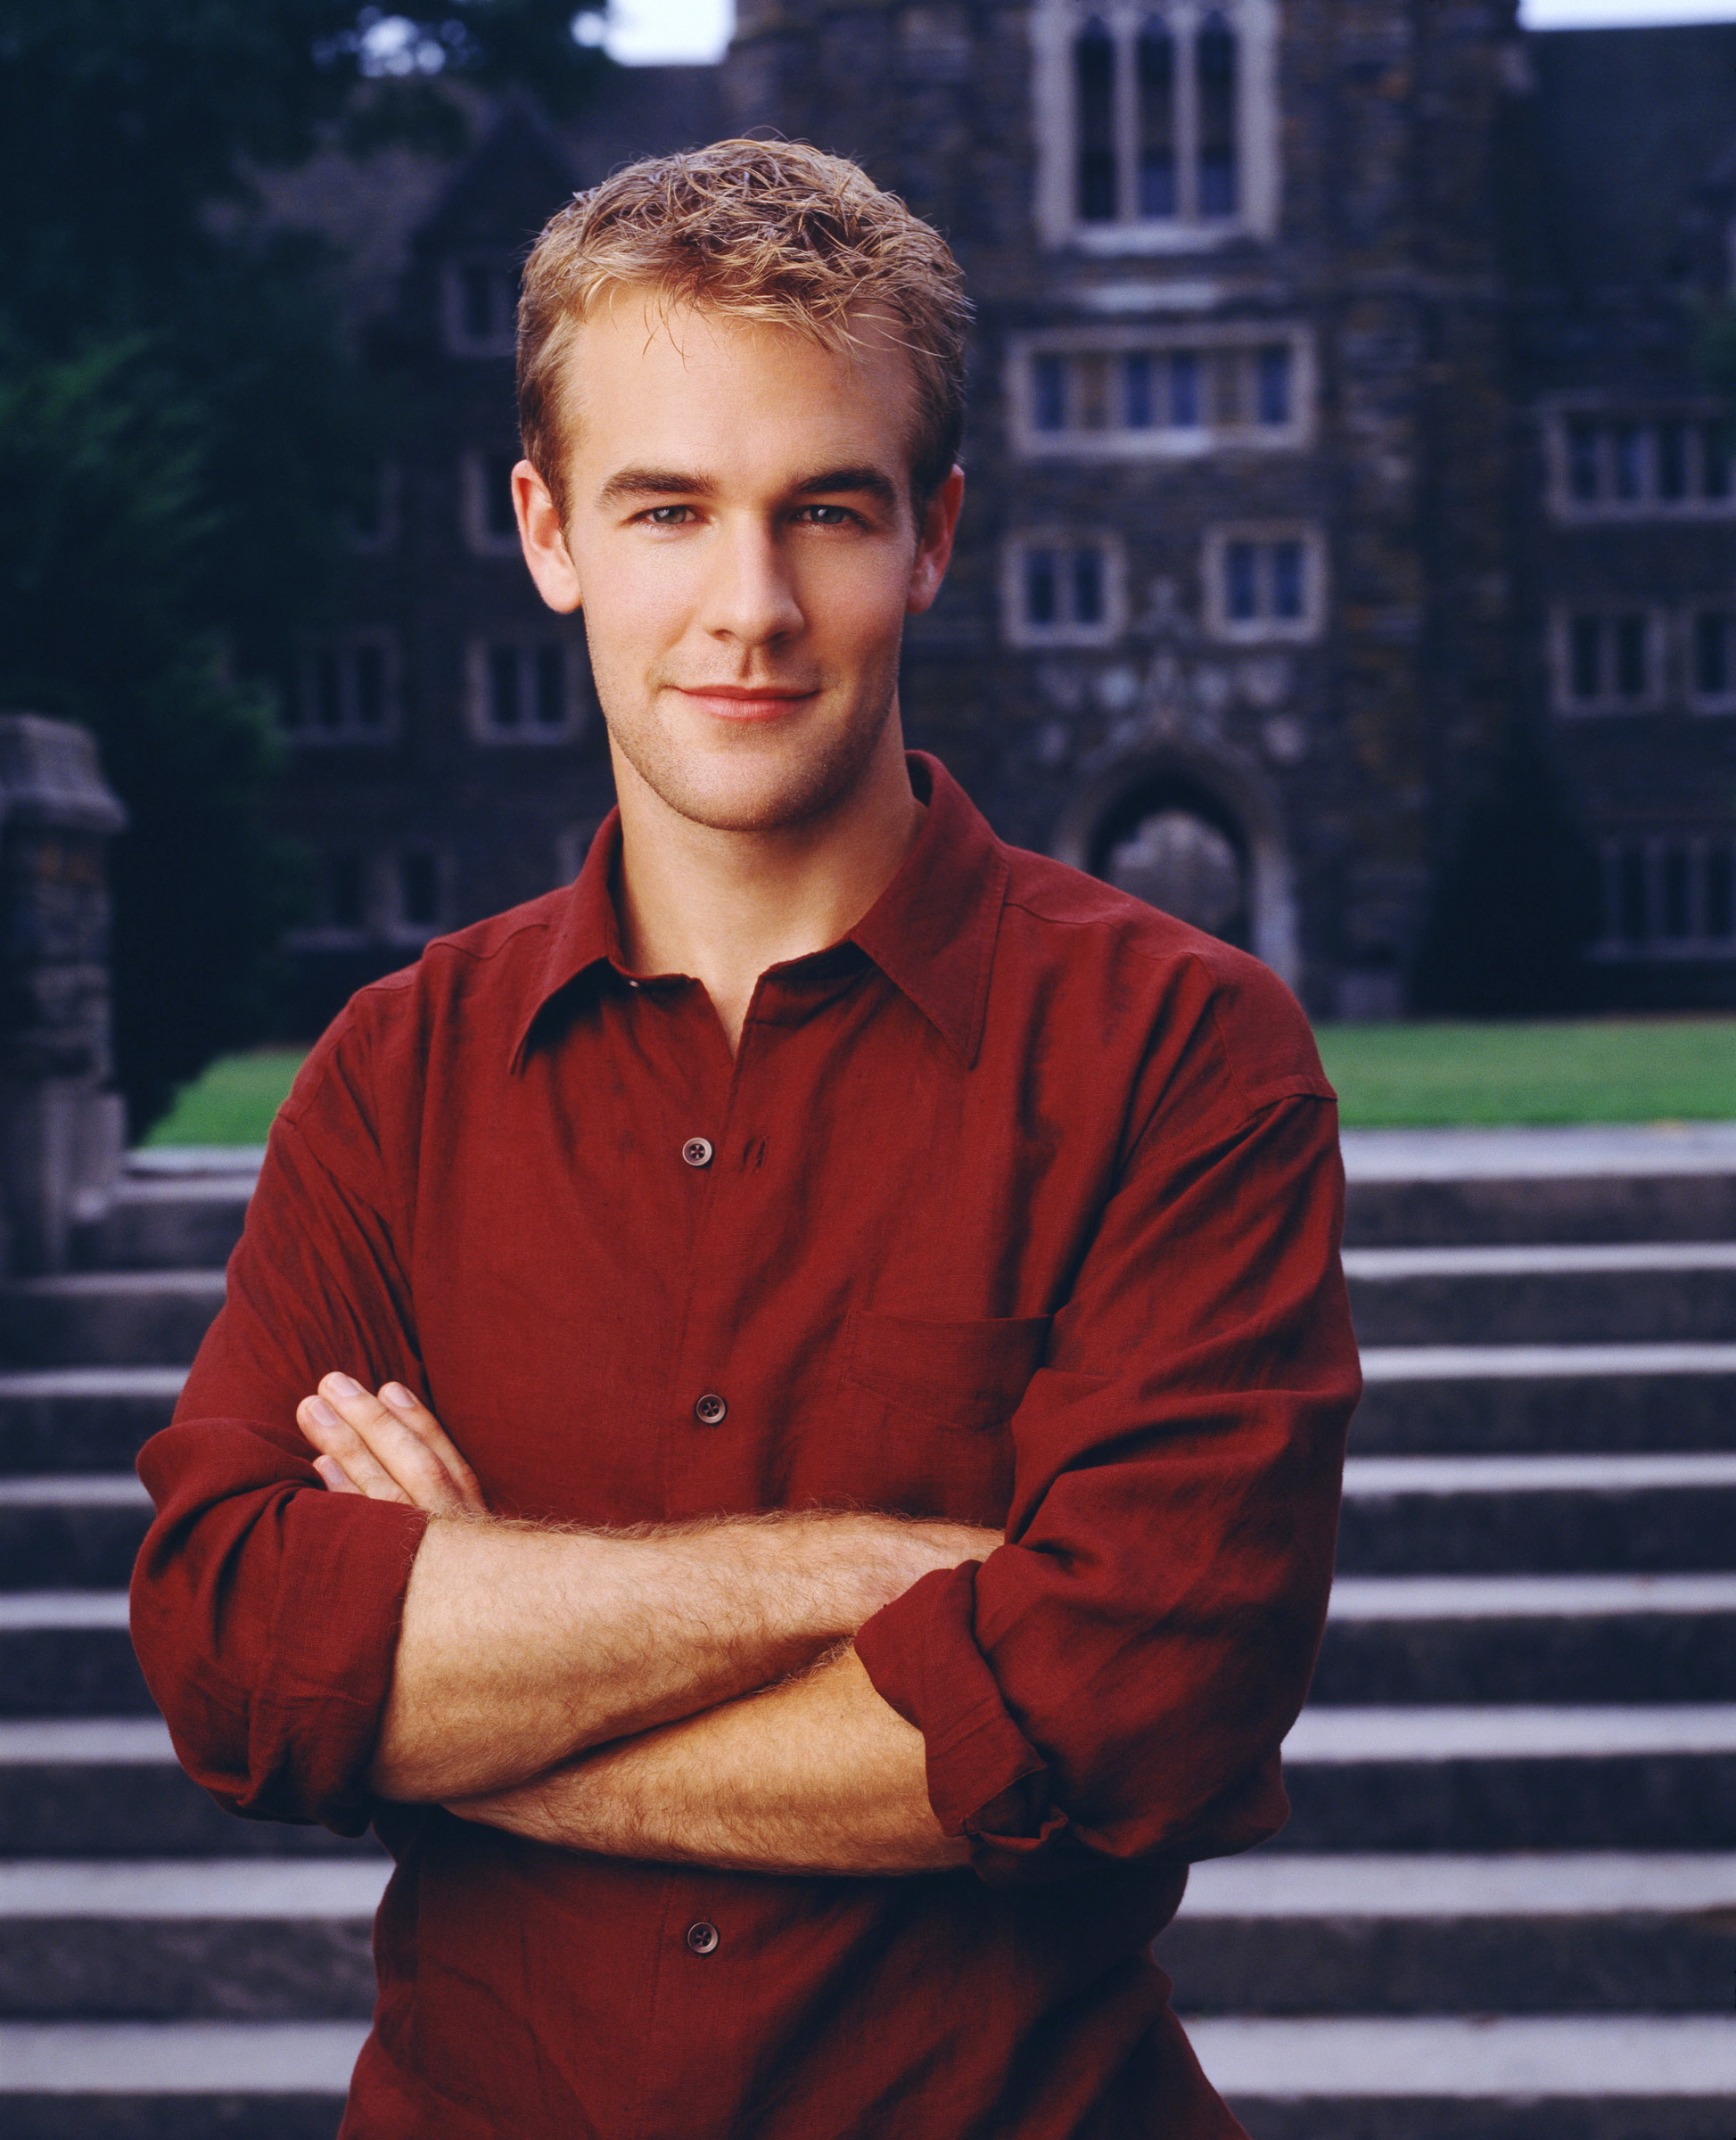 James Van Der Beek, as Dawson Leery, stands in front of a building, arms crossed, wearing a casual shirt